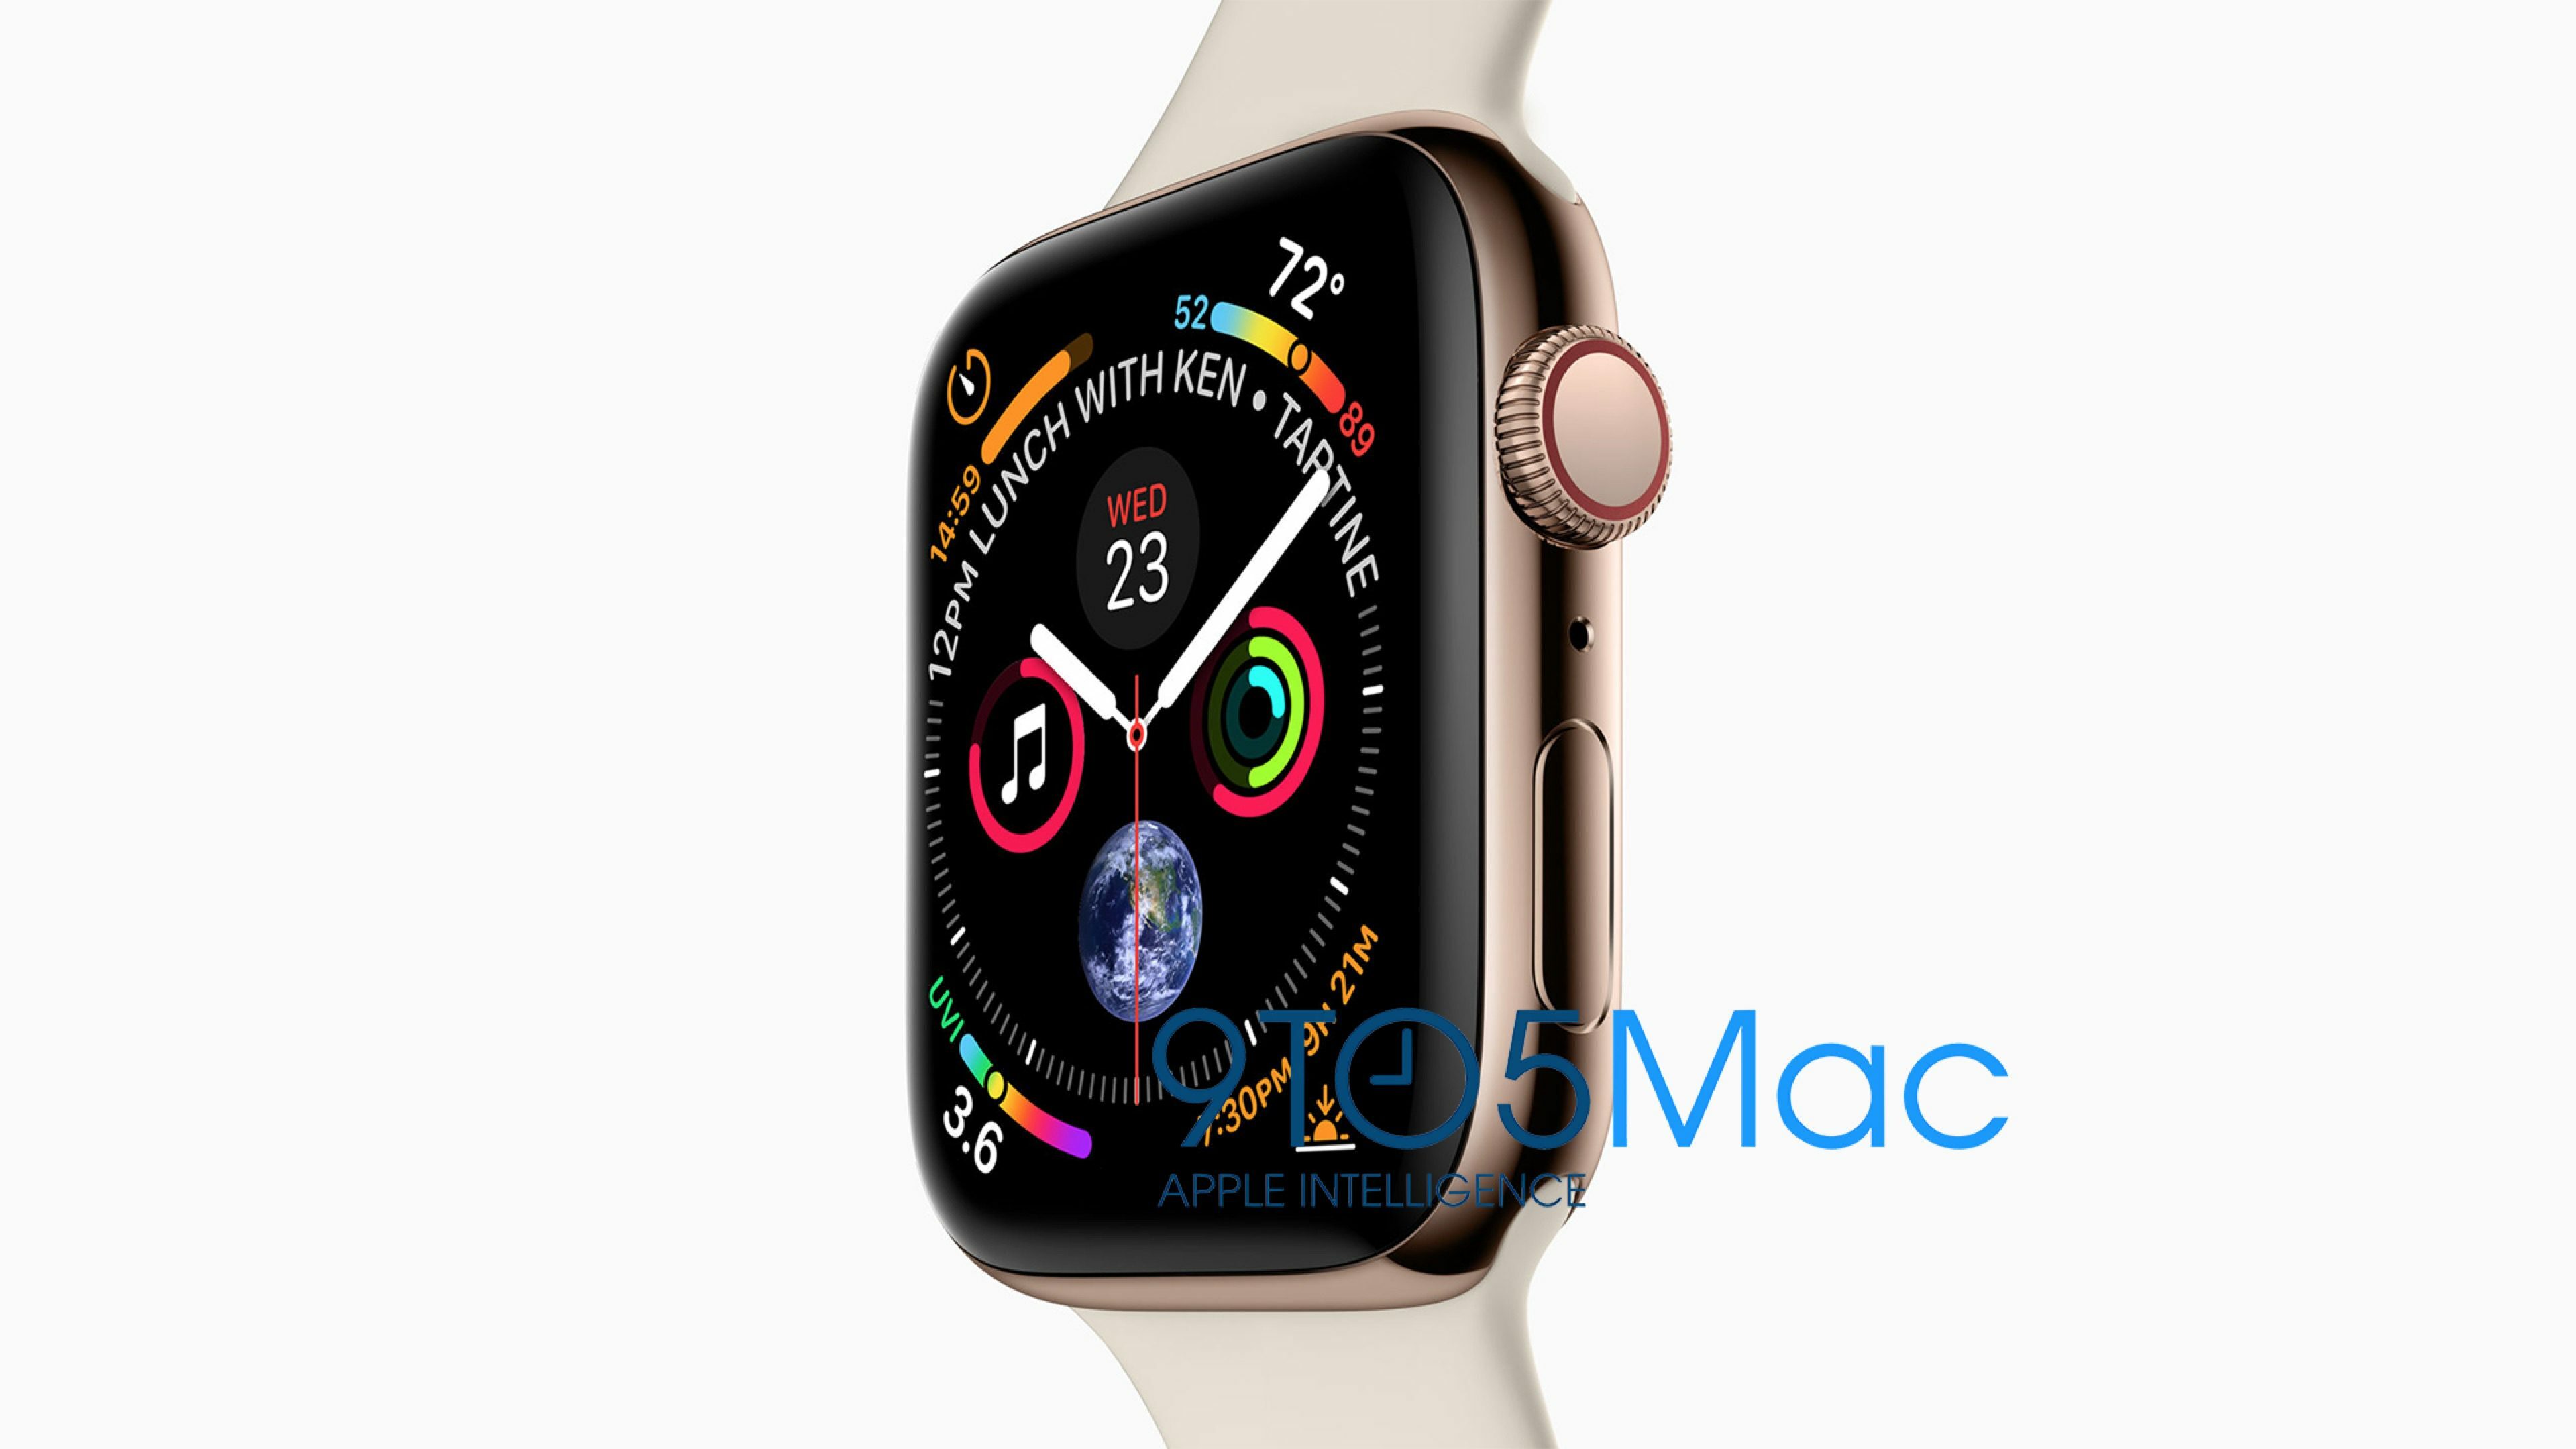 What will the Apple Watch Series 4 look like?